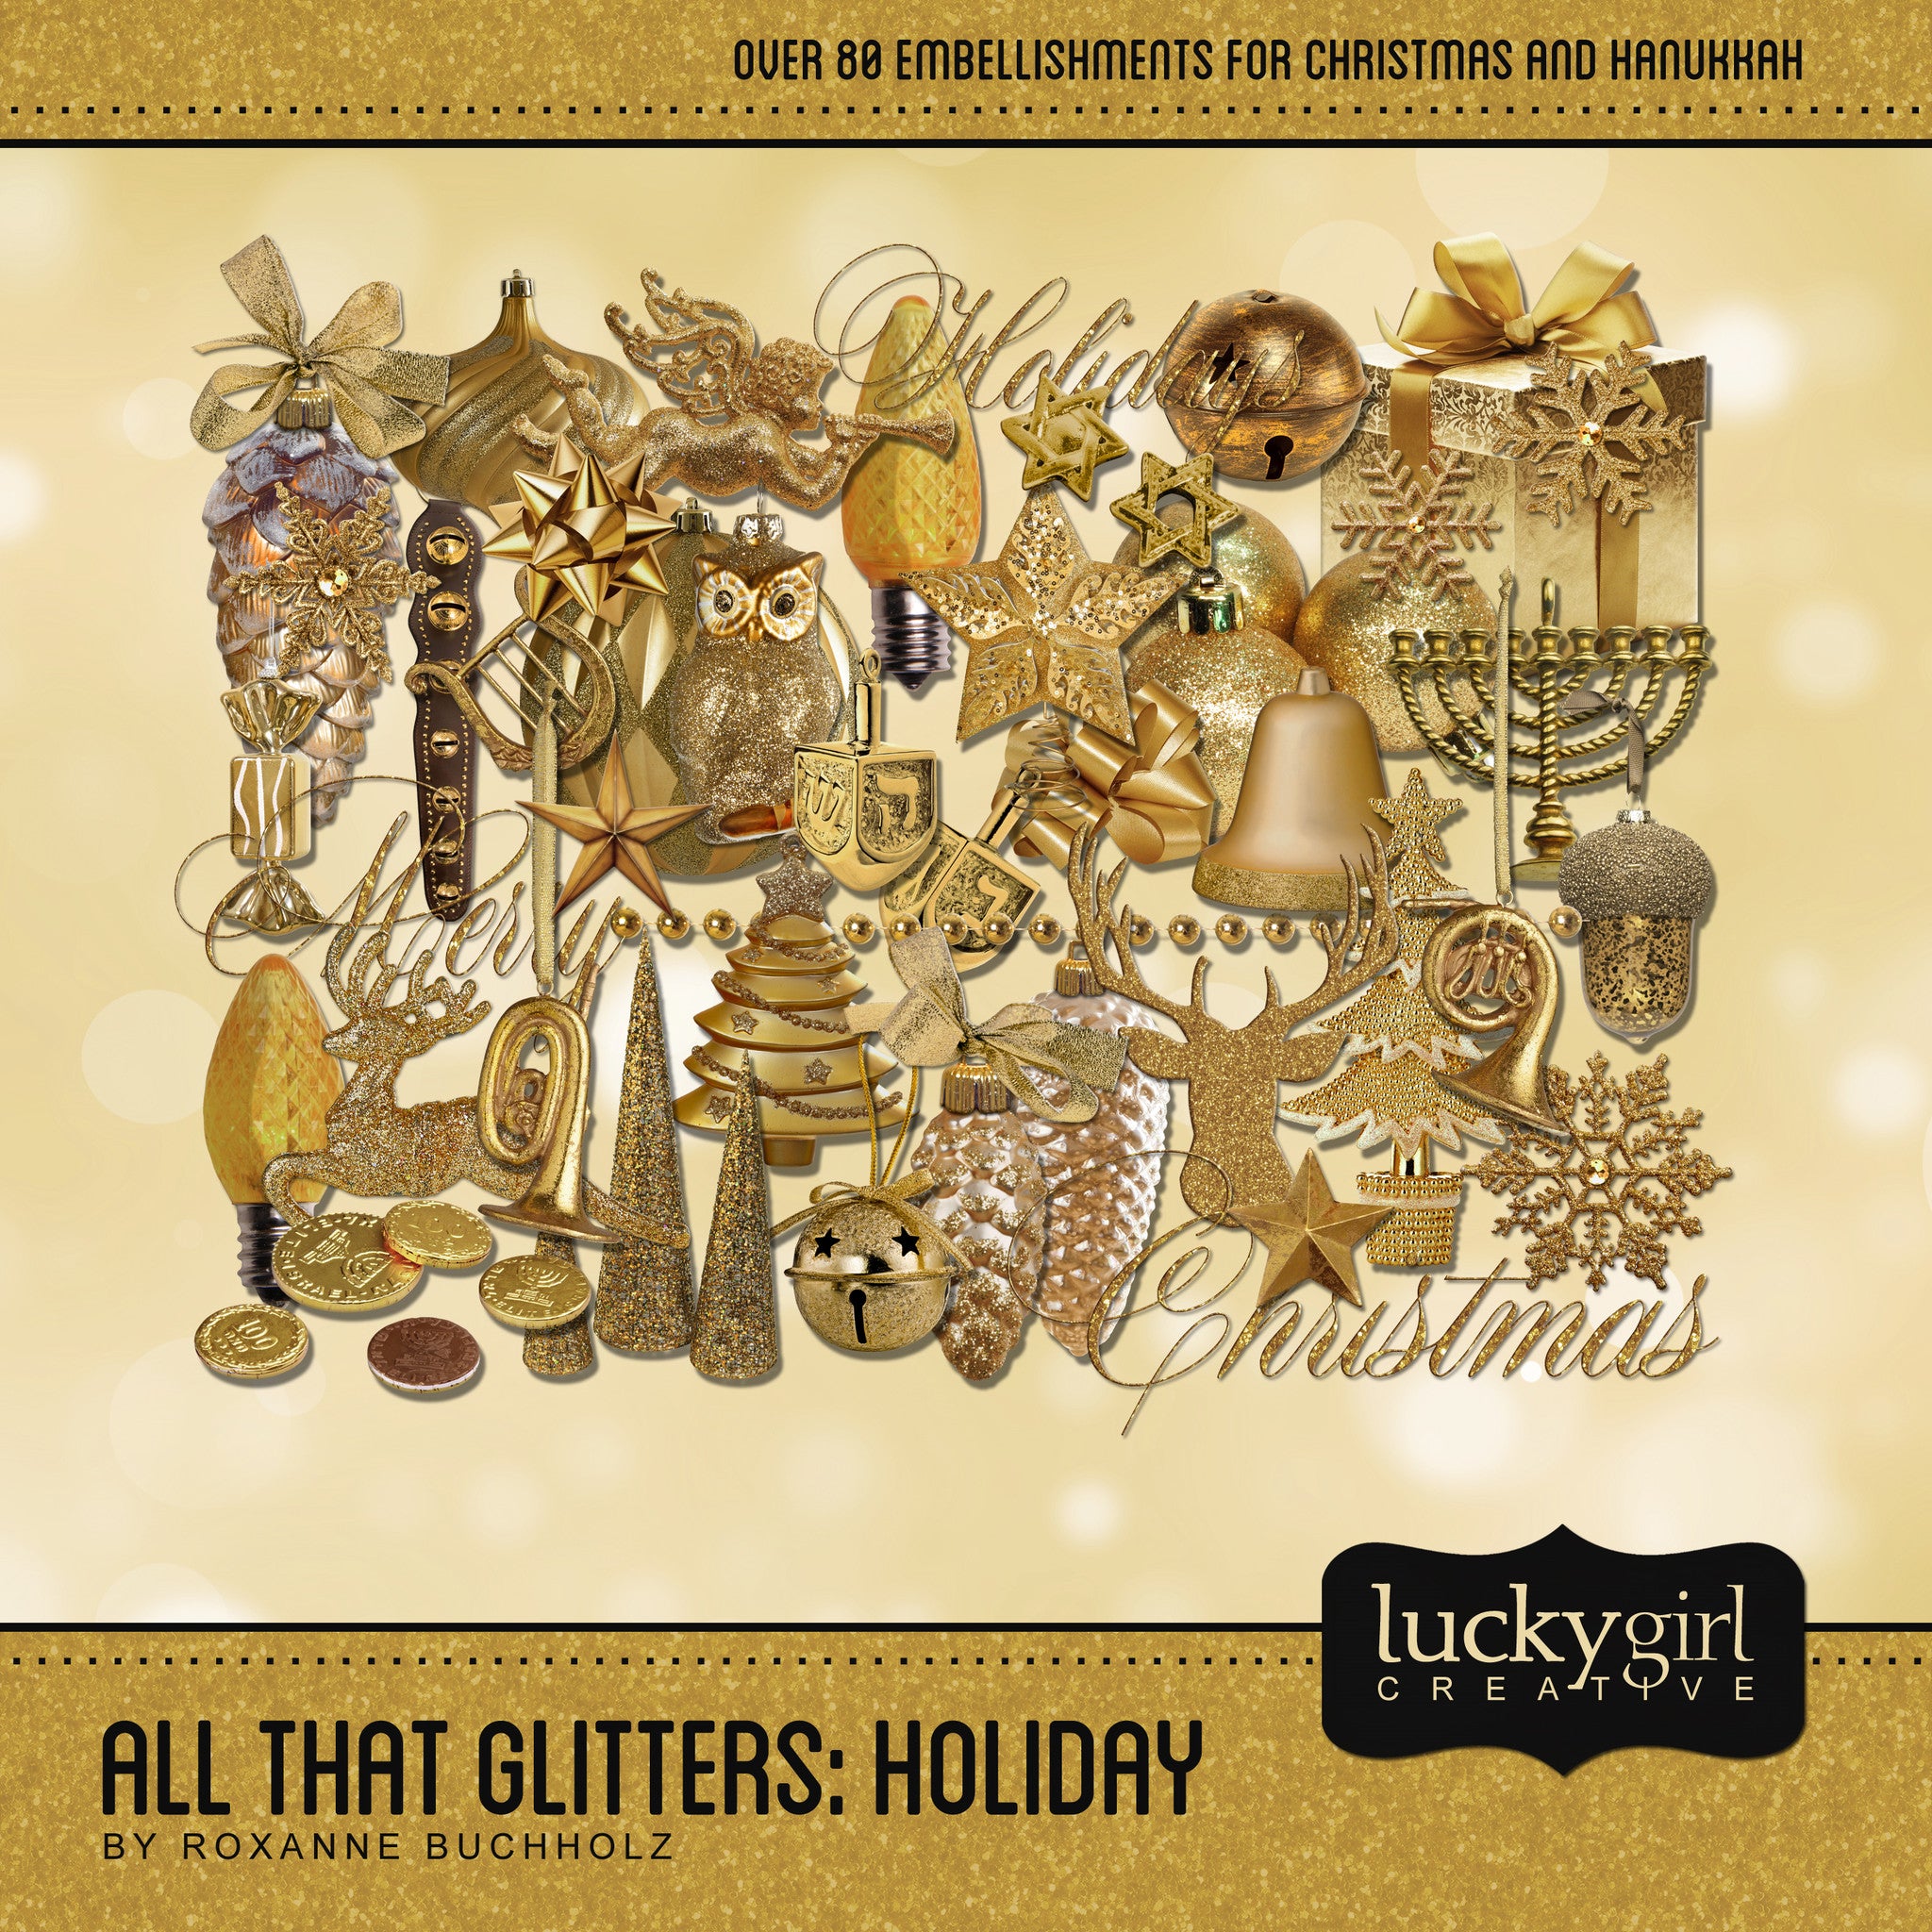 This gold and glitter themed digital scrapbooking collection is right on trend and perfect for the holiday season whether for Christmas, Hanukkah, or the holidays in general. All That Glitters Holiday Digital Scrapbook Kit features a photo-realist style that would appeal to anyone and will make the perfect holiday cards and scrapbooking pages.